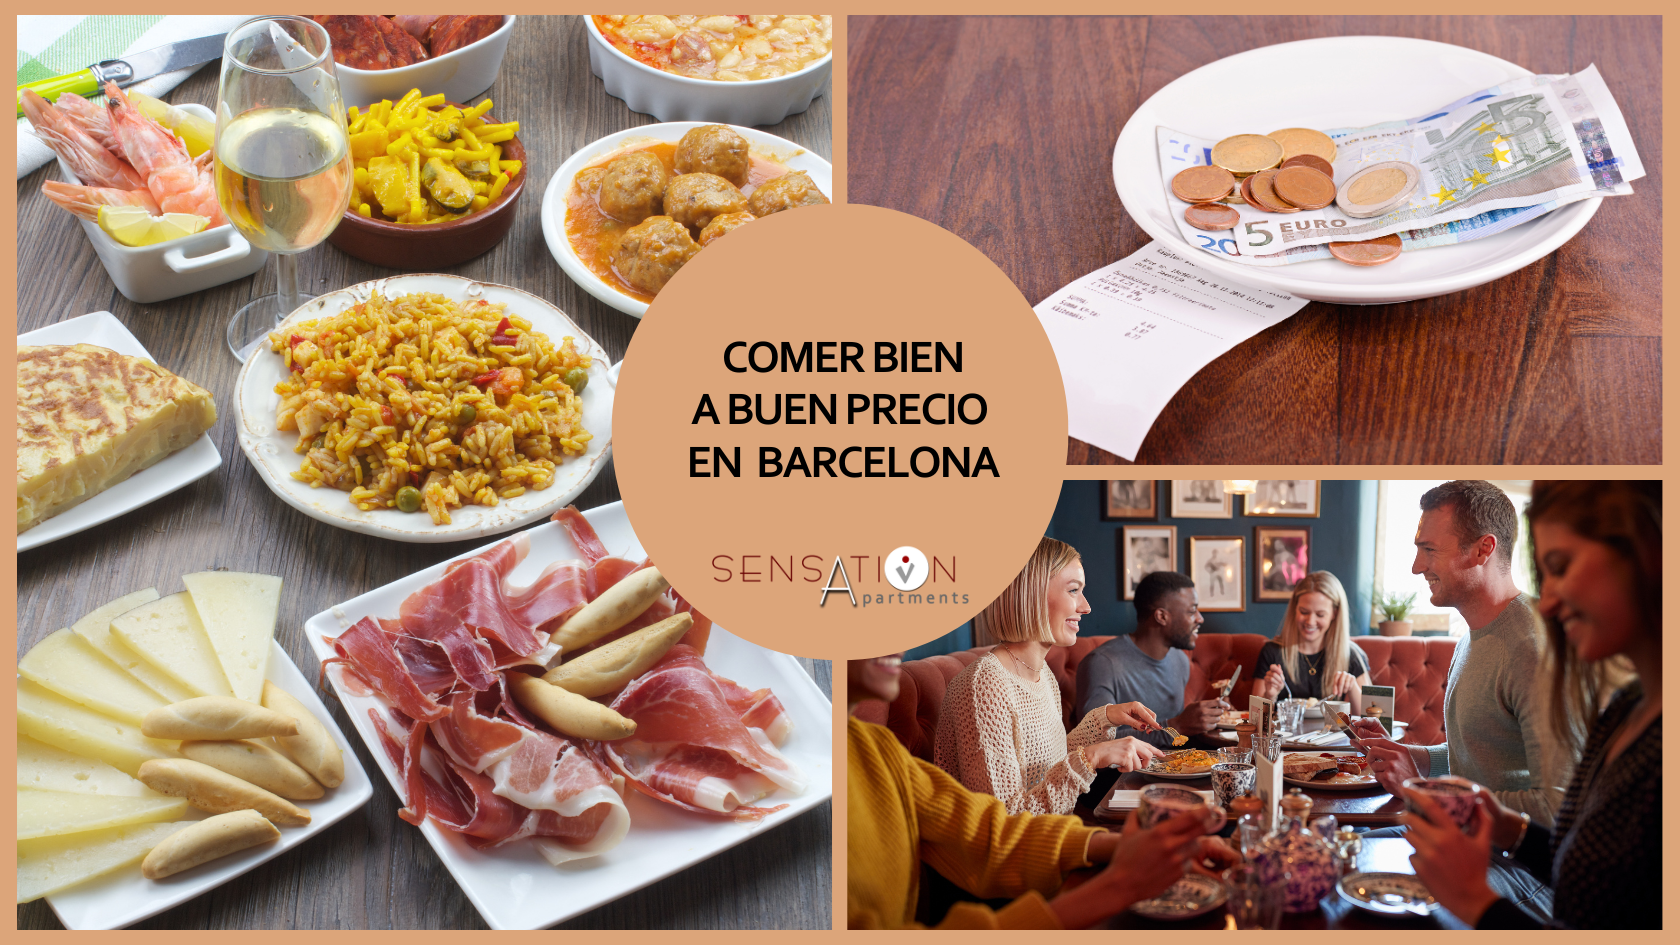 Eat well at a good price in Barcelona